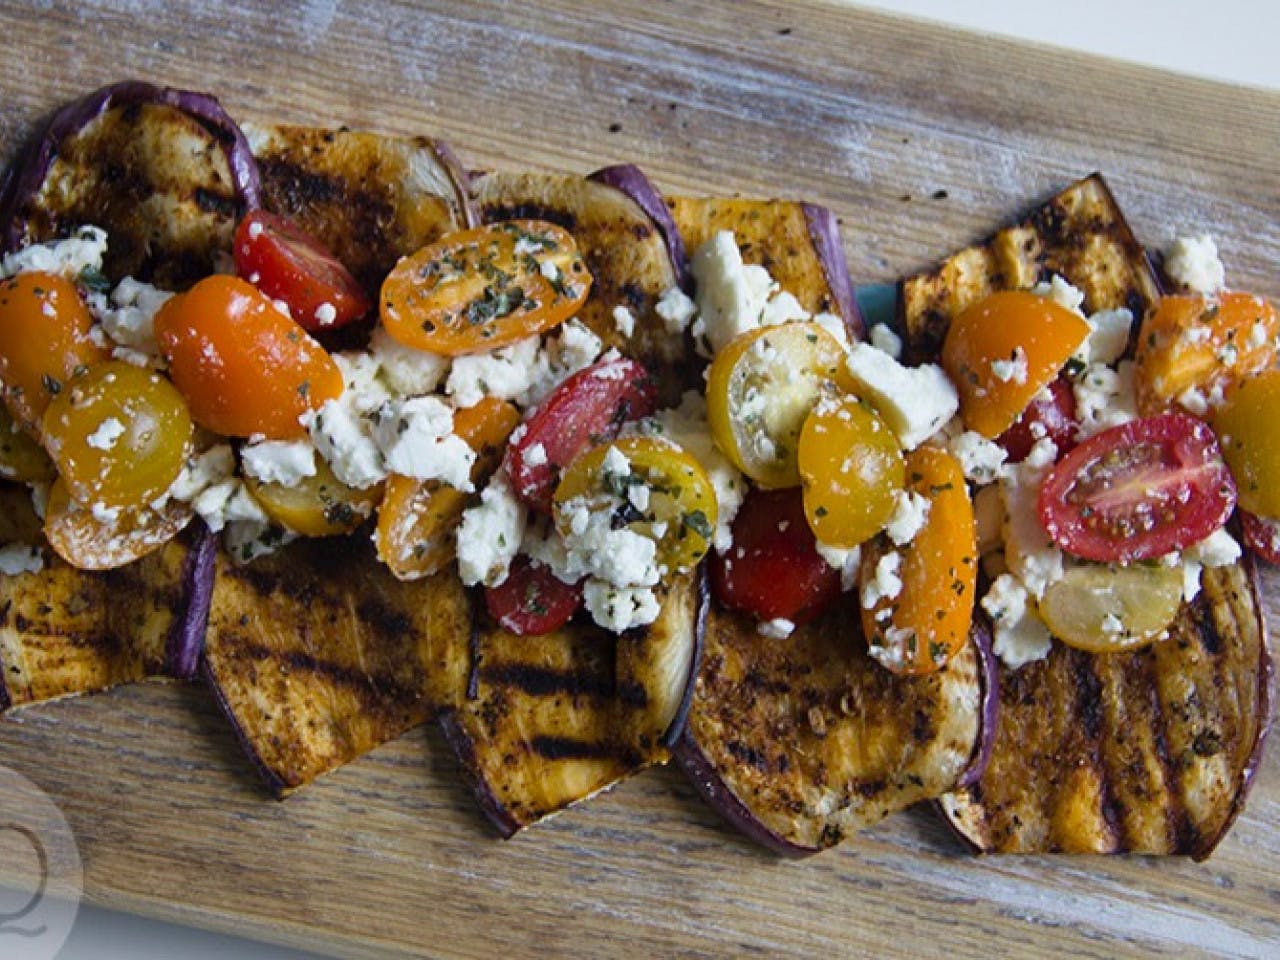 Grilled aubergine with tomato and feta